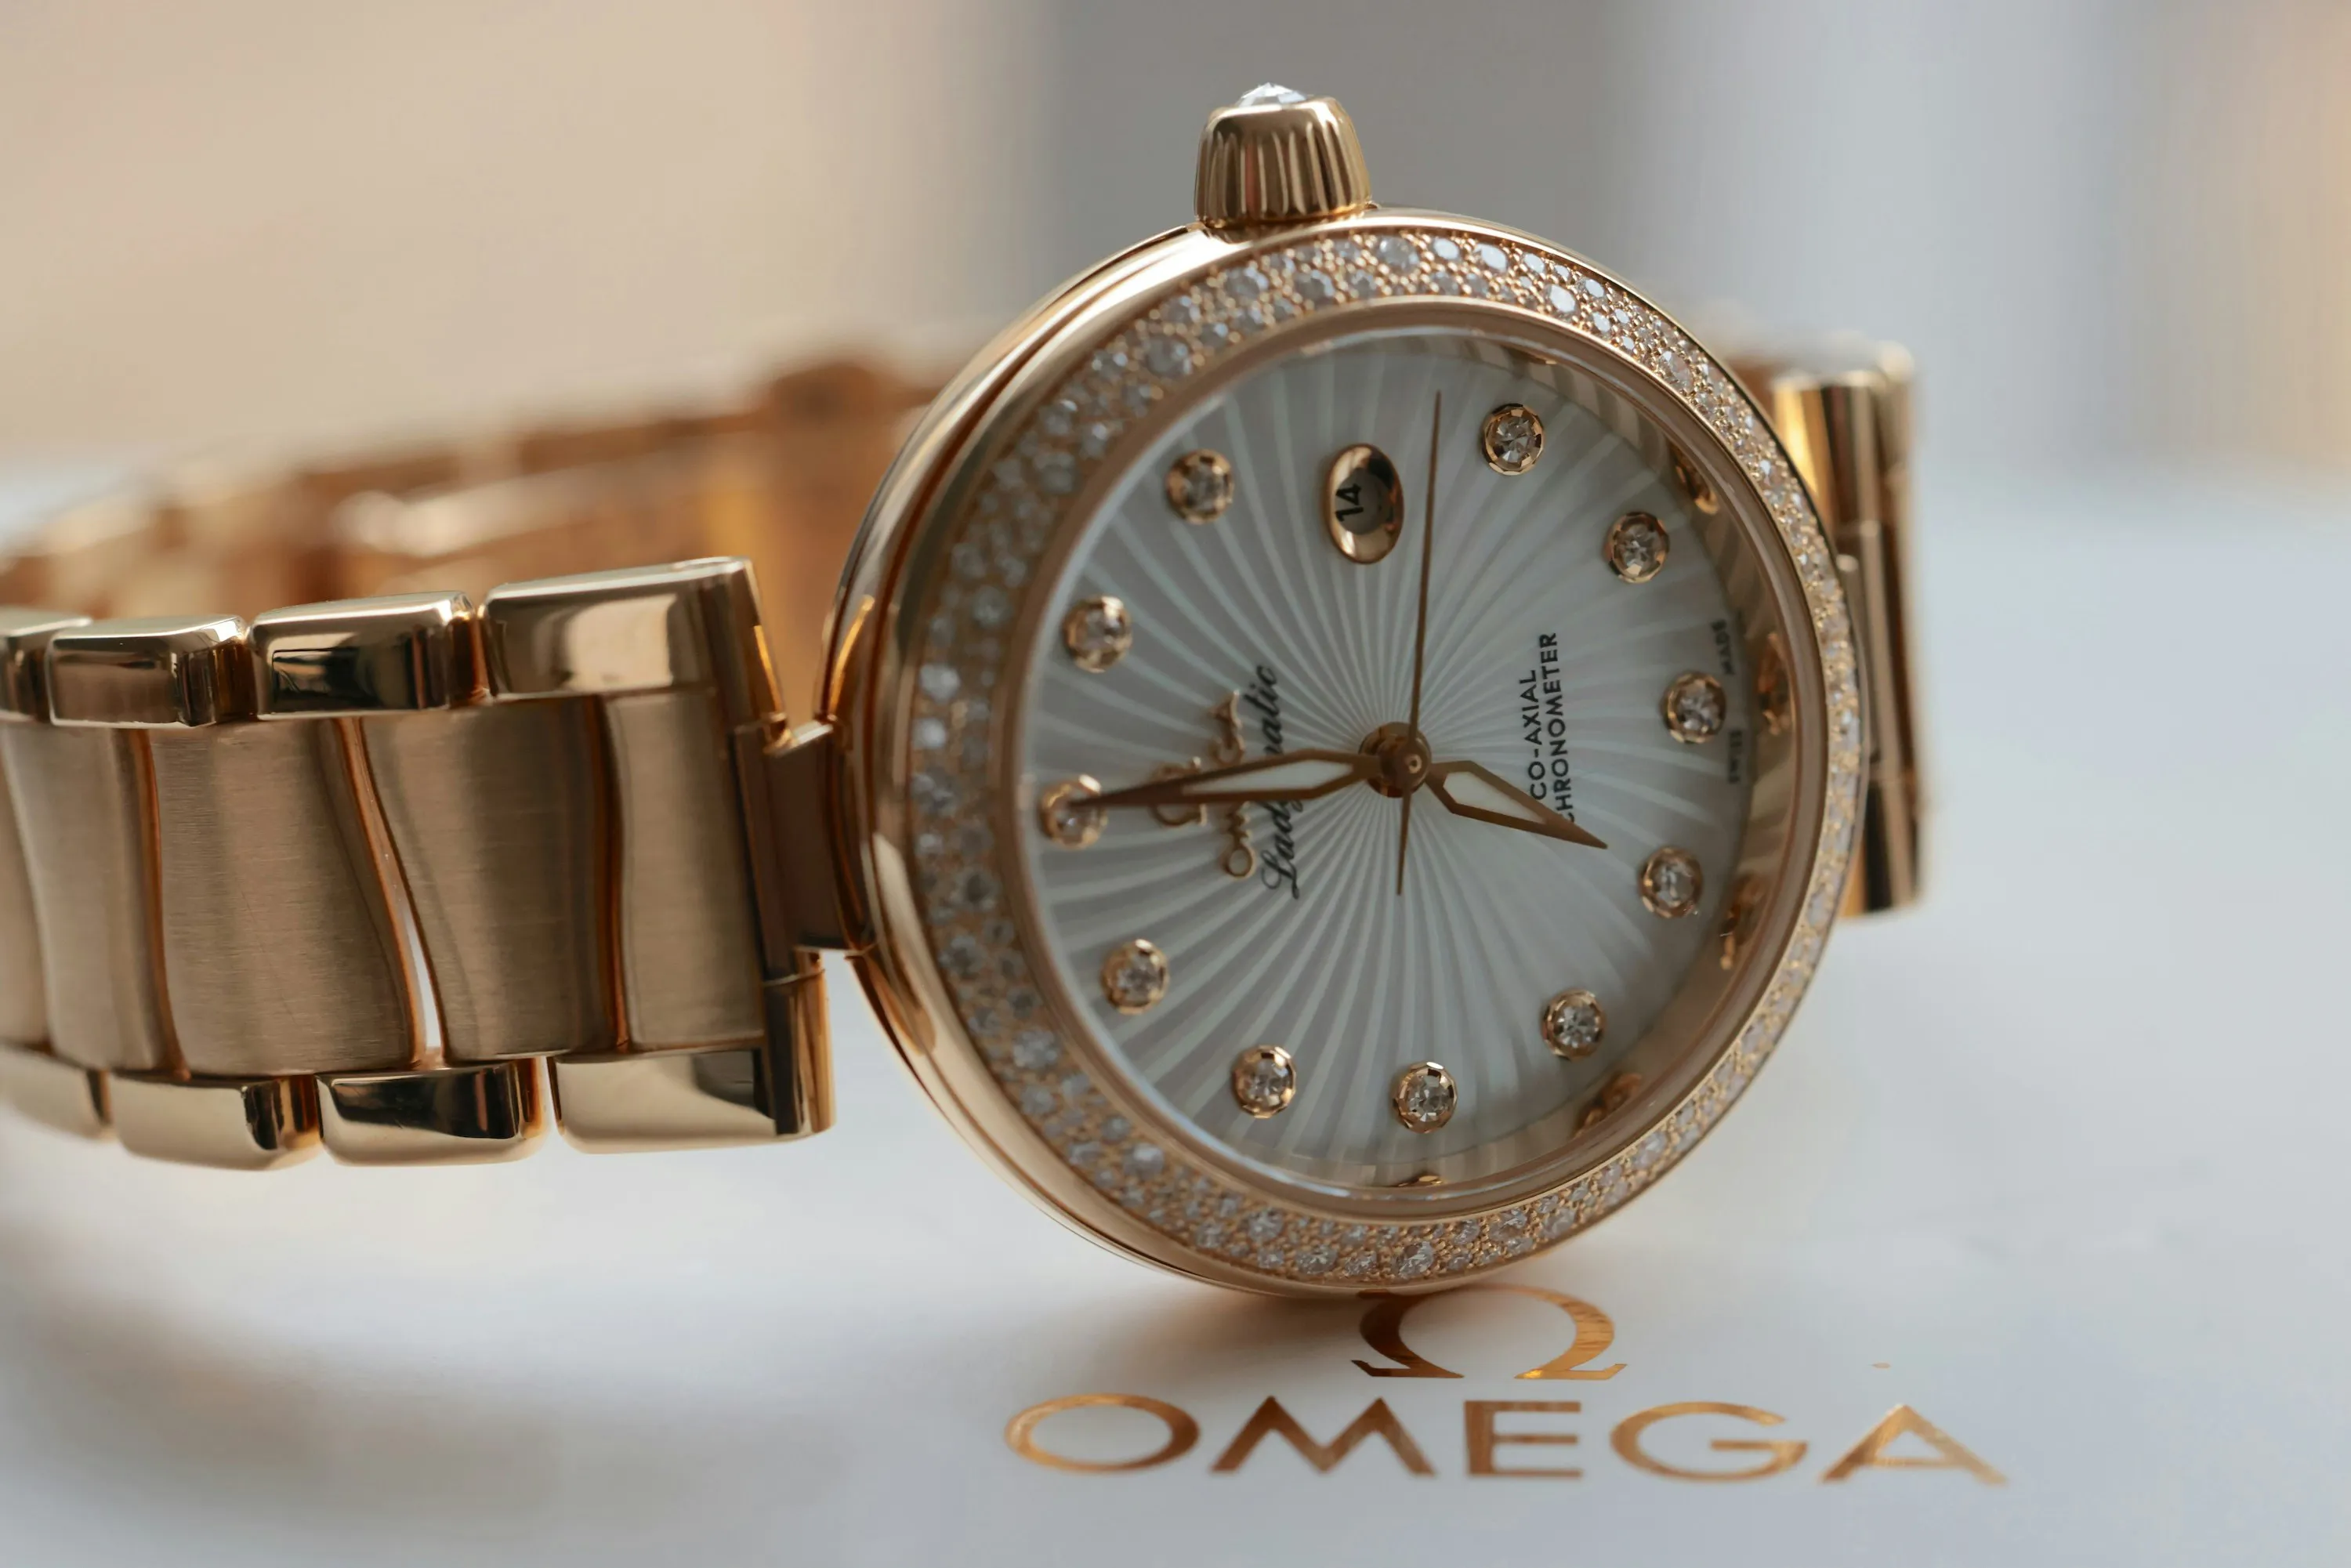 Omega De Ville 425.65.34.20.55.002 34mm Yellow gold and diamond-set Silver